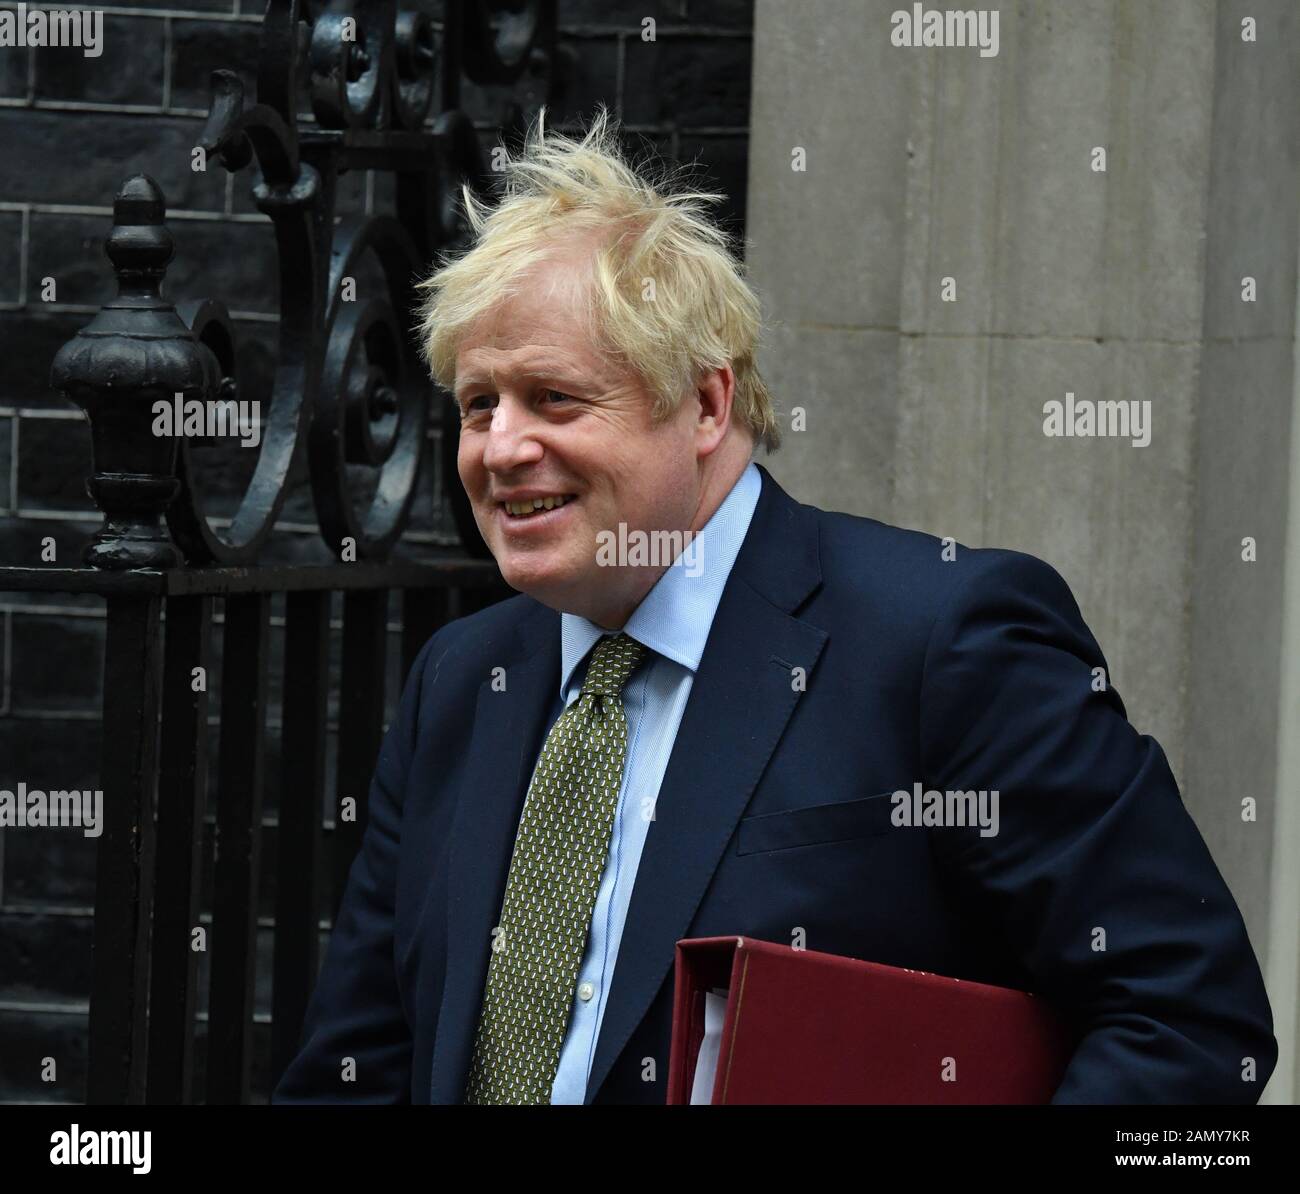 10 Downing Street, London, UK. 15th January 2020. Prime Minister Boris Johnson leaves Downing Street to attend weekly Prime Ministers Questions in Parliament. Credit: Malcolm Park/Alamy Live News. Stock Photo